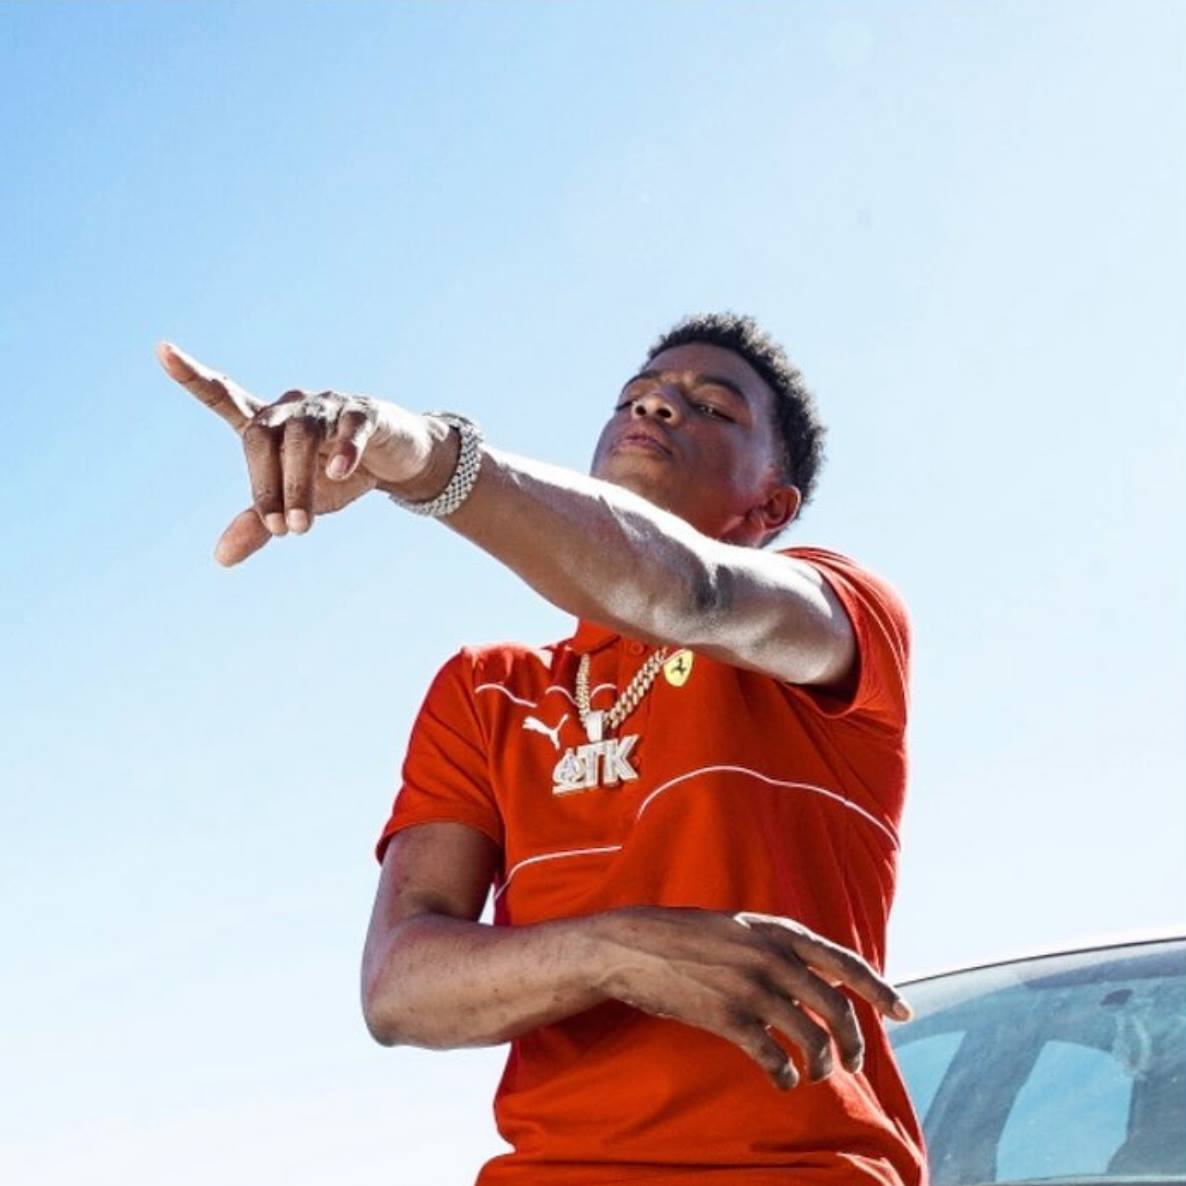 Yungeen Ace in red, positioned with his arm out and pointing, next to a car